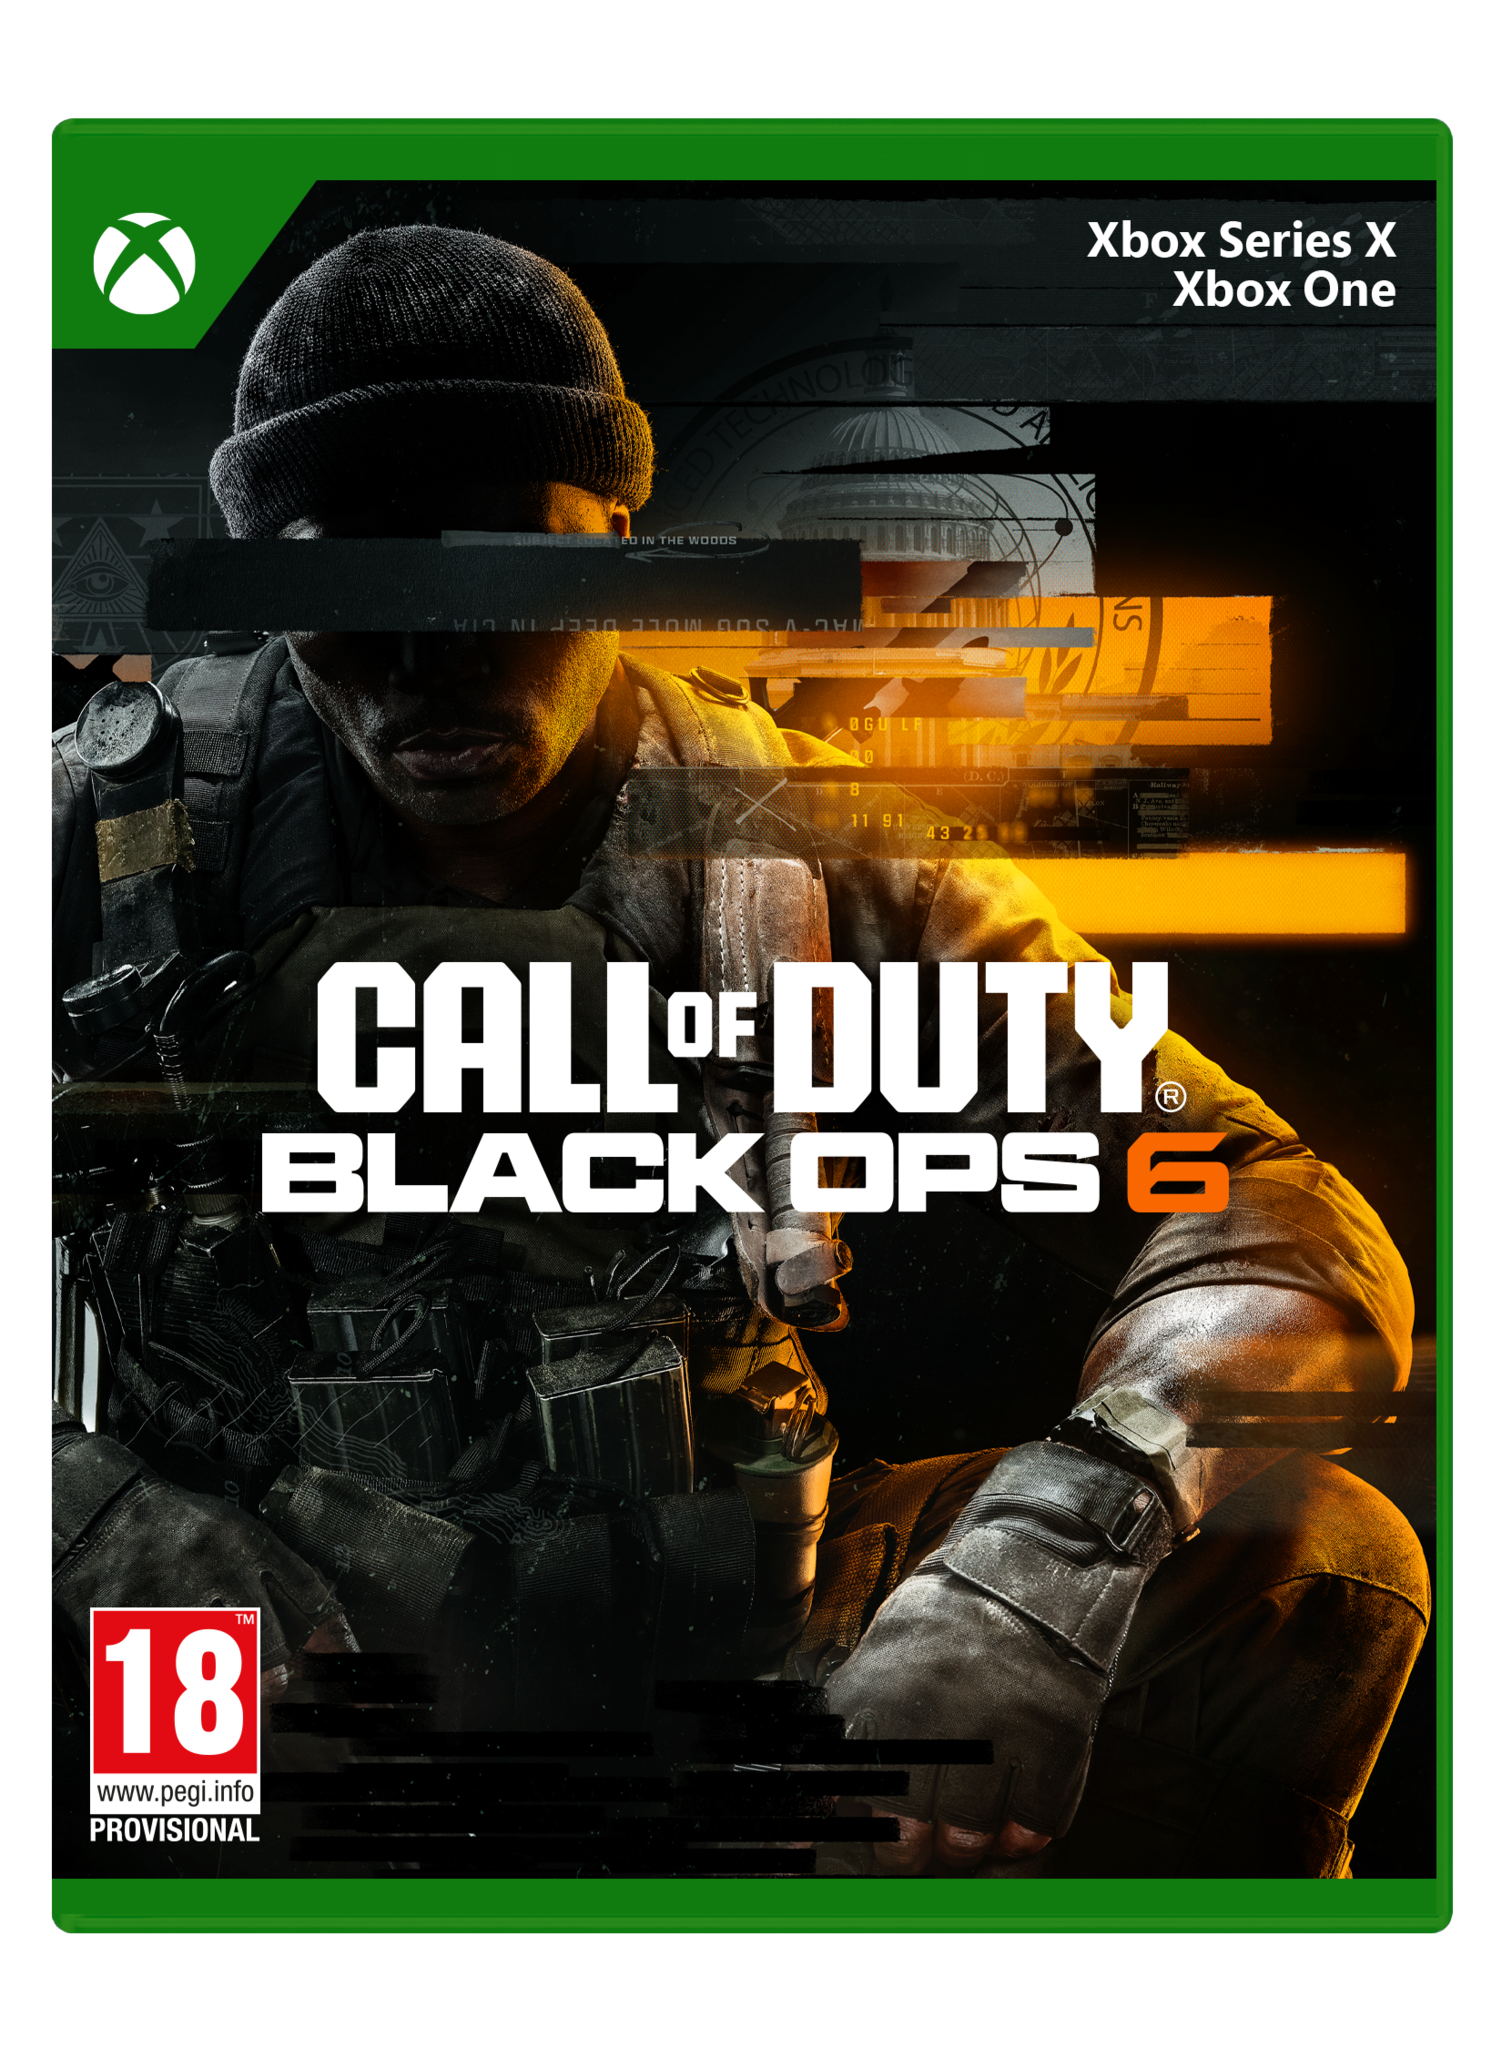 Xbox One/Series X Call of Duty: Black Ops 6 + Open Beta Code